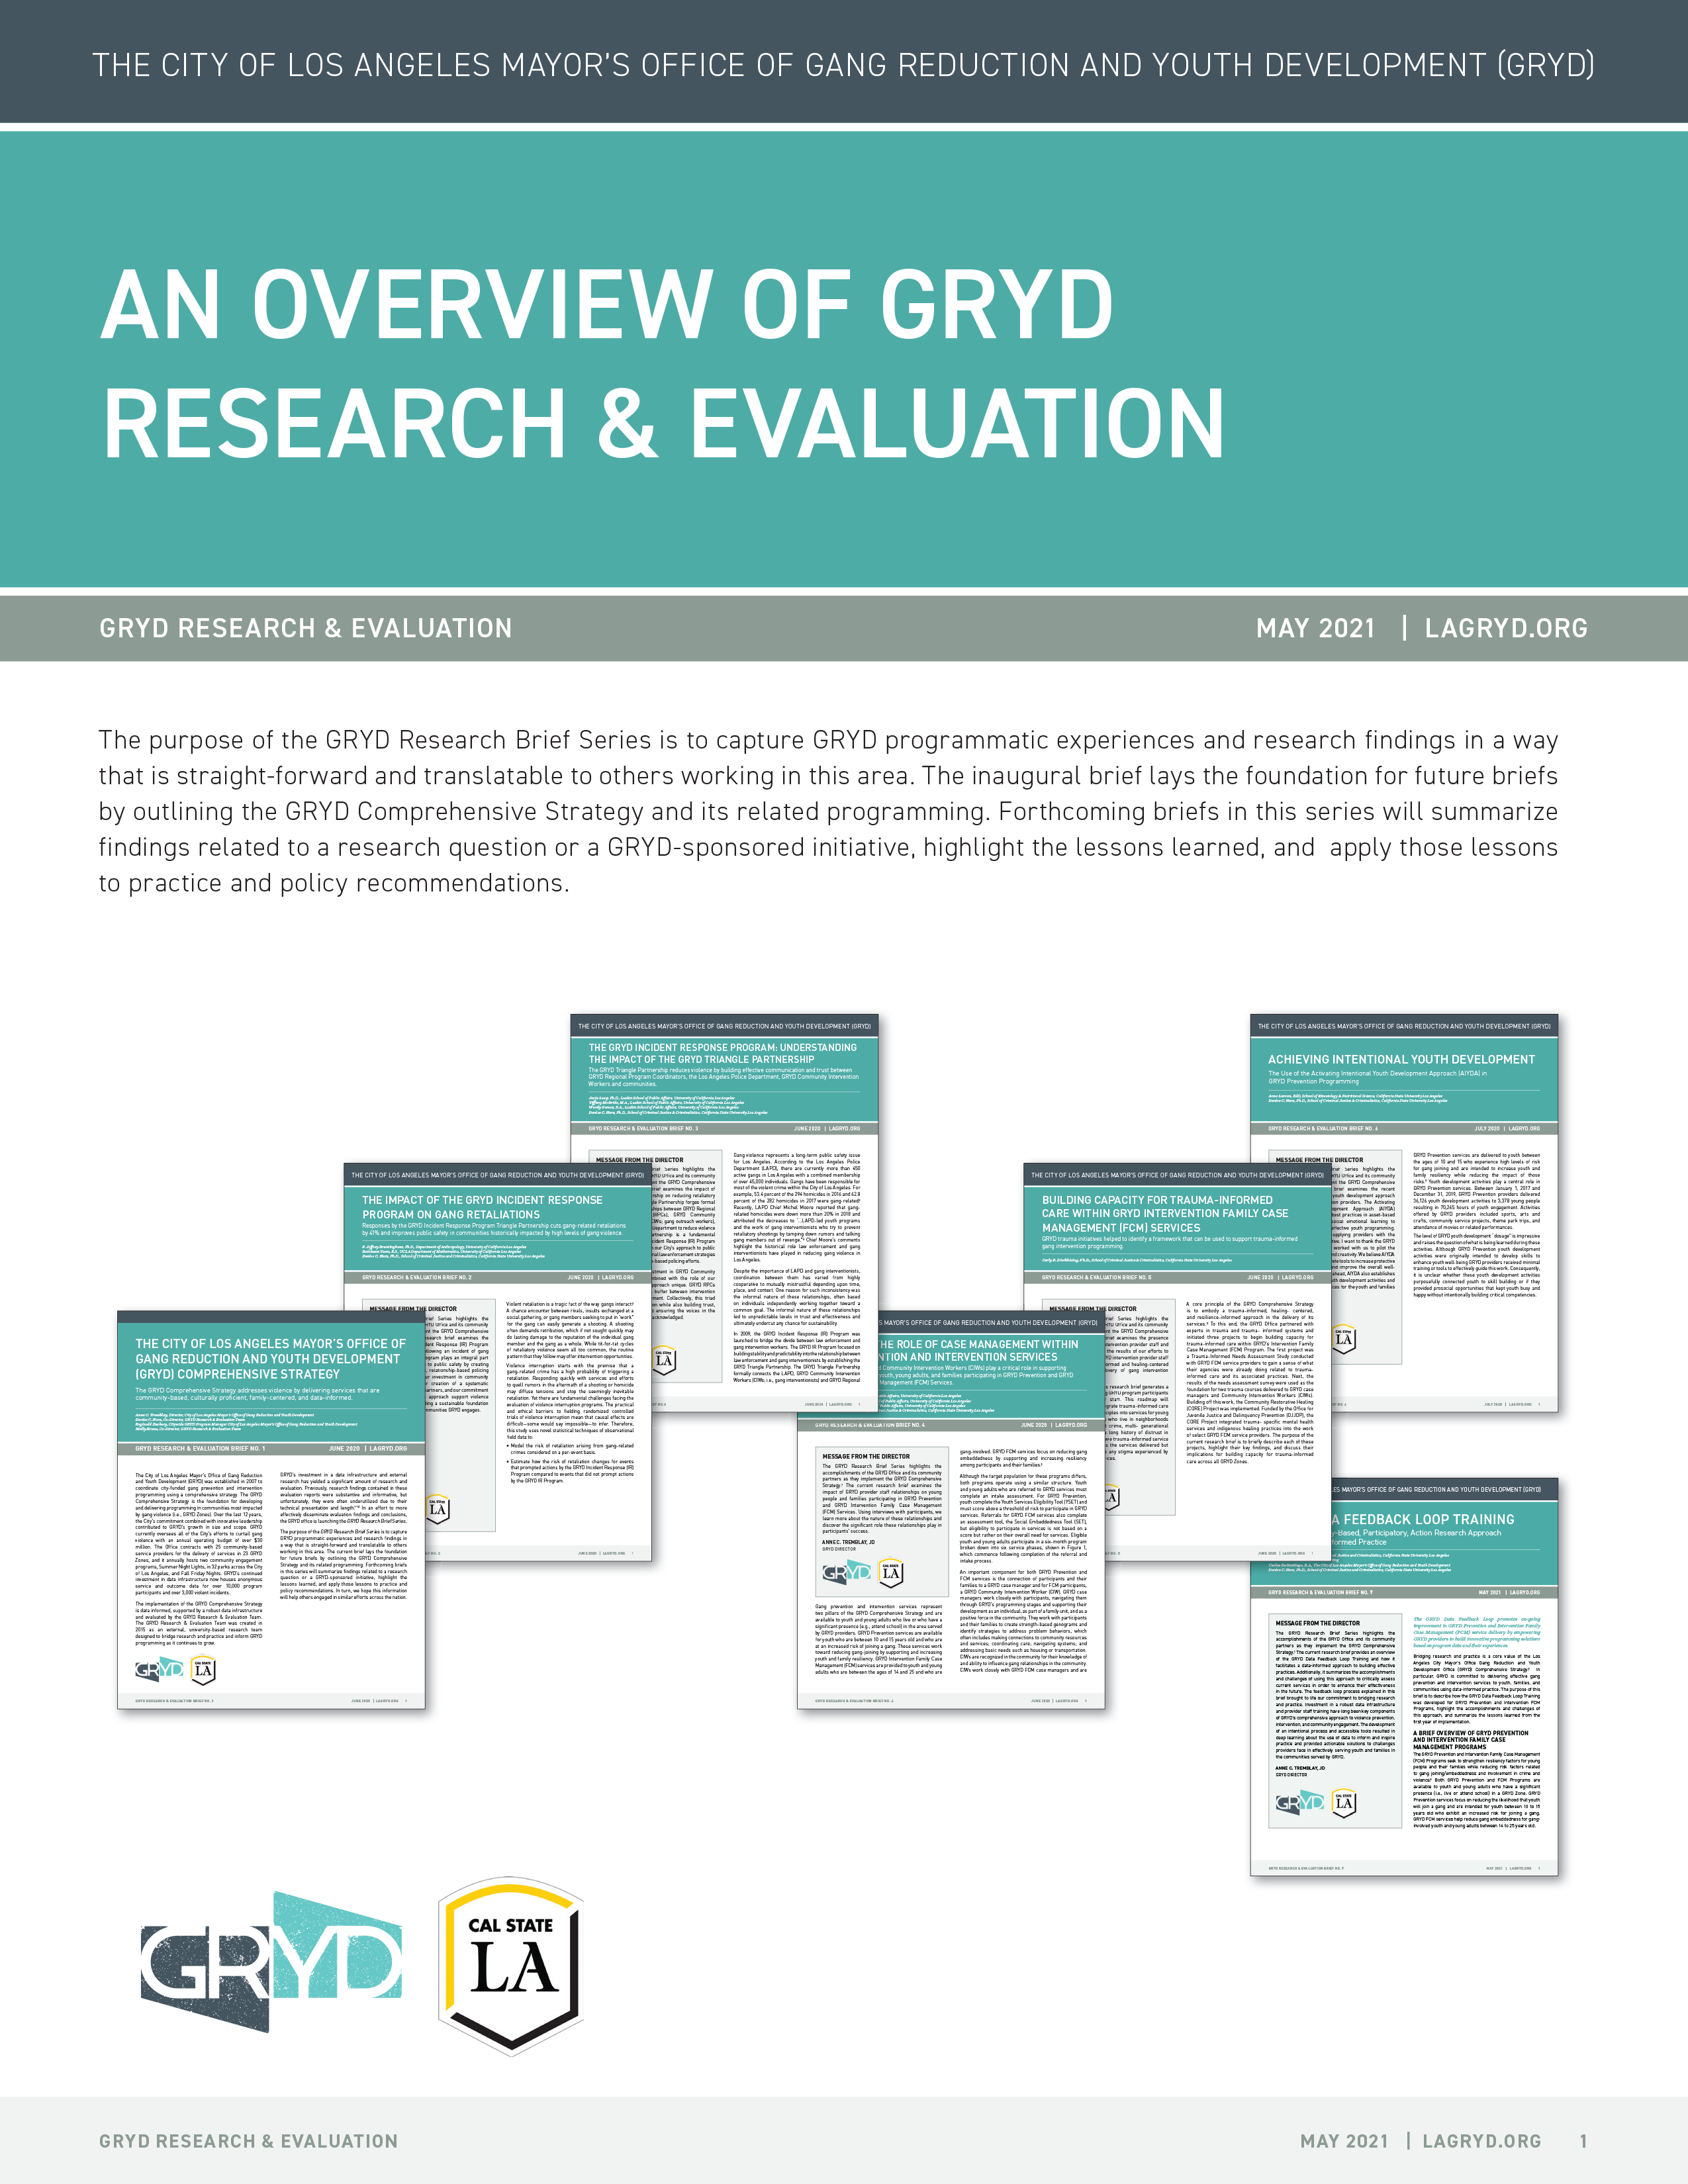 An Overview of GRYD Research & Evaluation